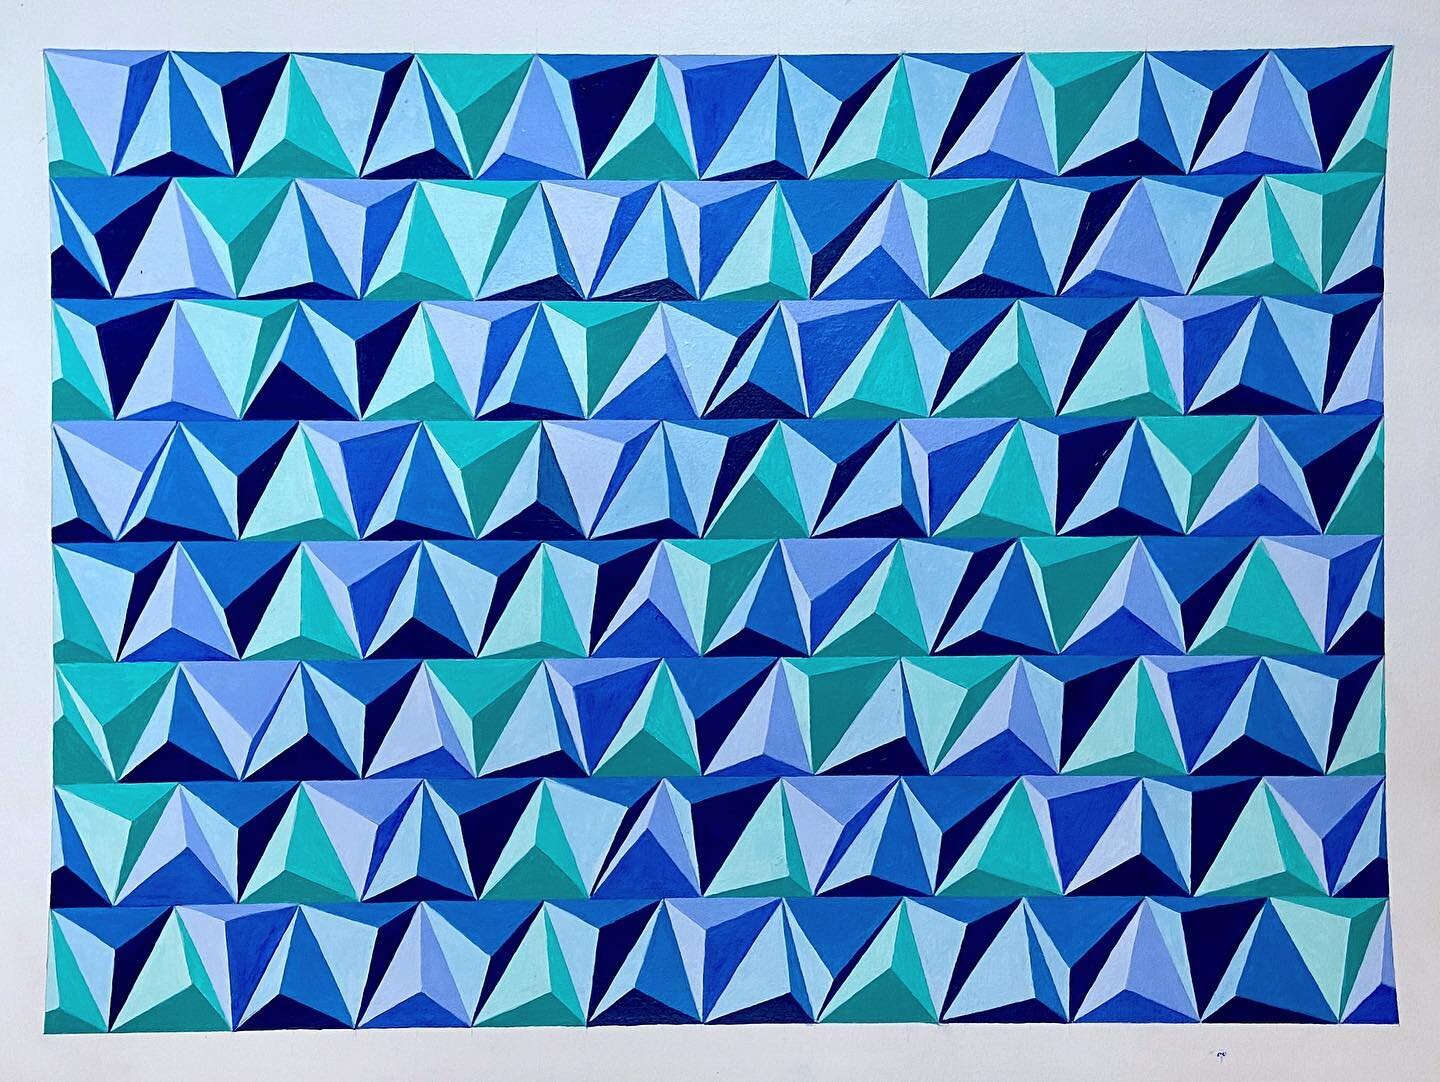 From 3 years ago today!
One of the first painting experiments that I started exploring patterning more intently.

#art #artwork #abstract #abstractart #abstractpainting #pattern #patterndesign #patternpainting #geometric #geometricpattern #geometricp